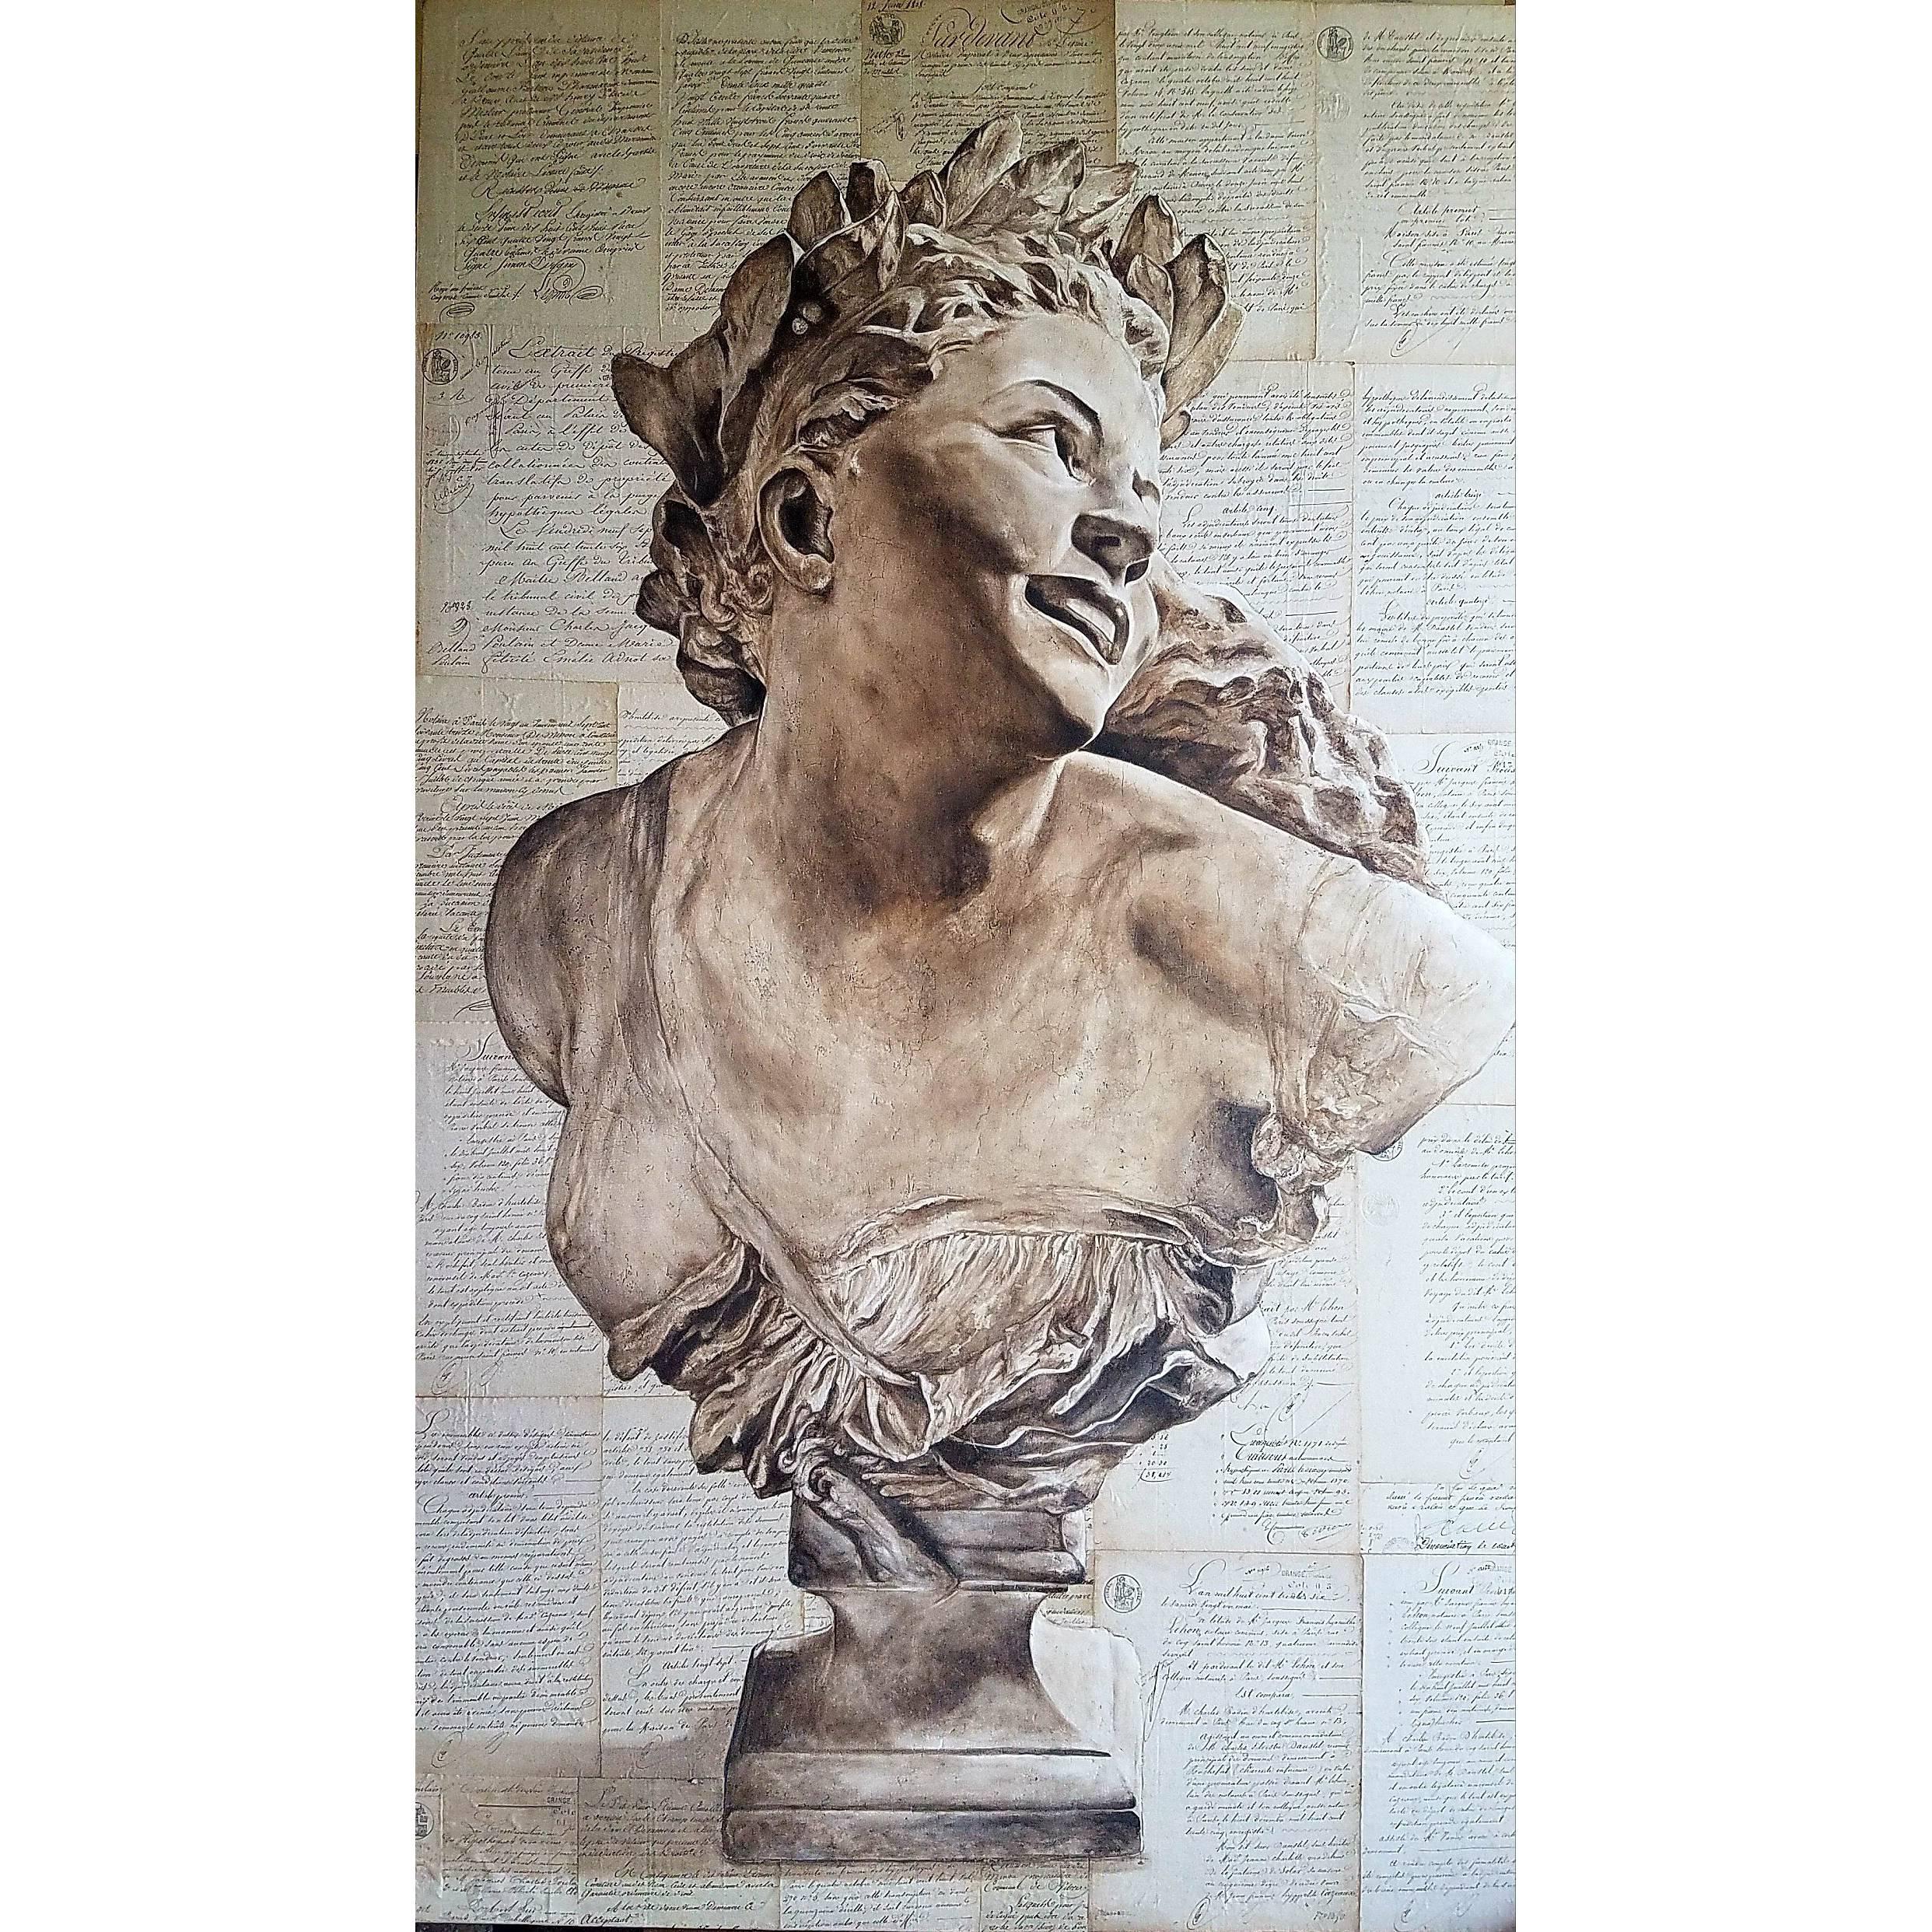 Original Oil on Wood Panel, 19th Century Sculpture over Antique French Document